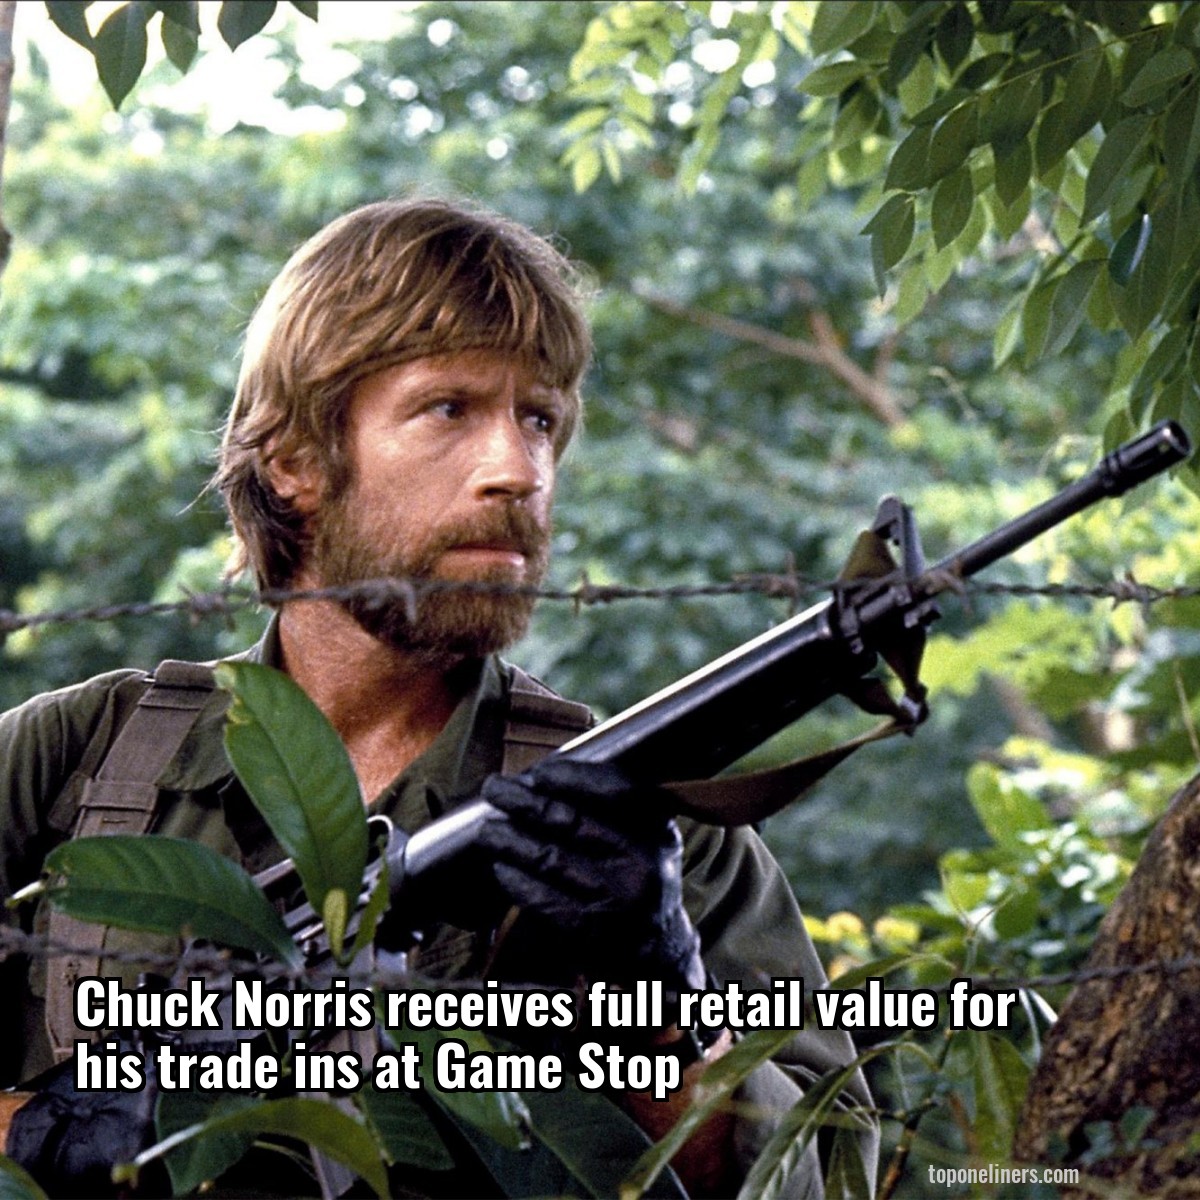 Chuck Norris receives full retail value for his trade ins at Game Stop